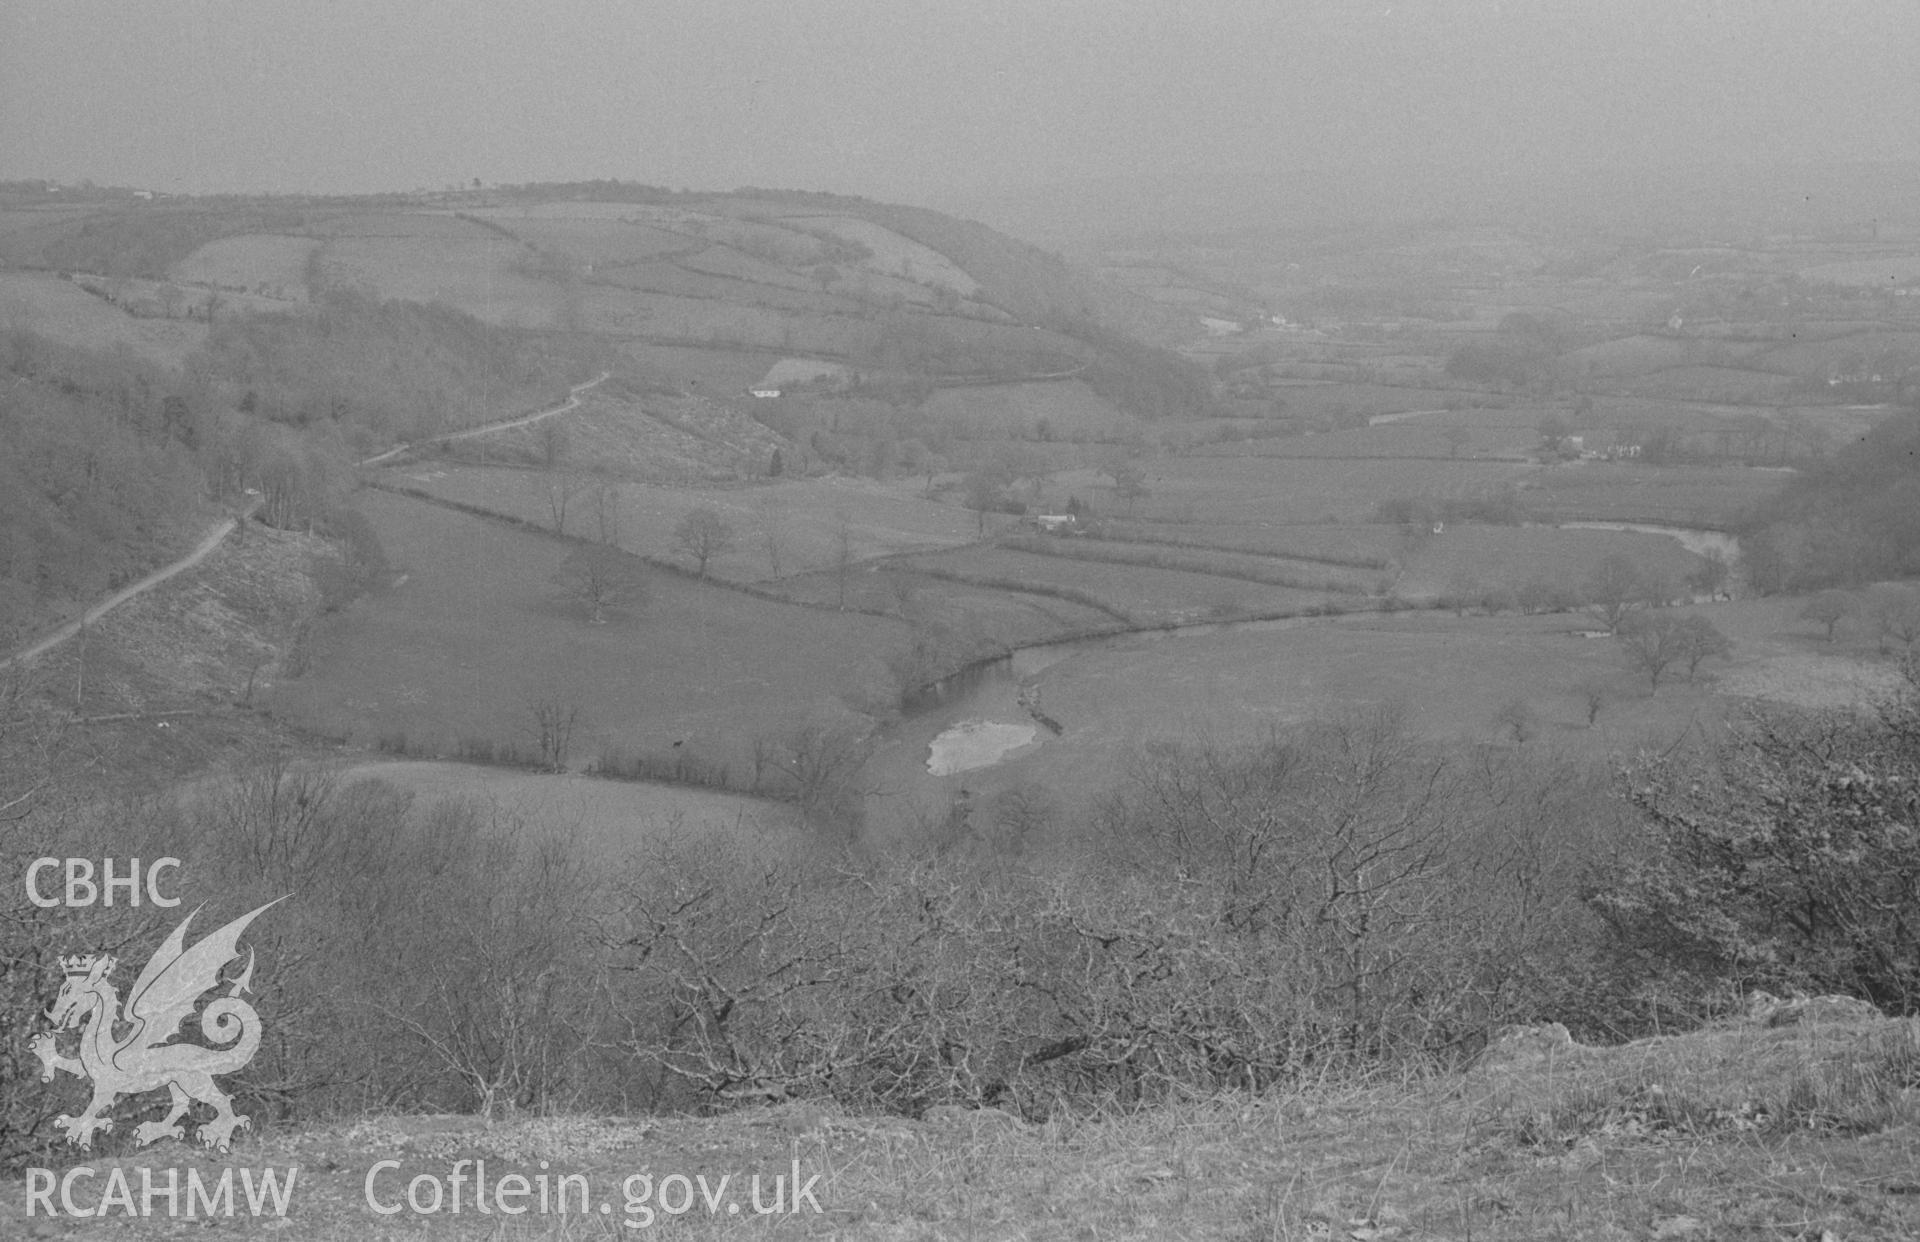 Digital copy of a black and white negative showing view looking east up the Teifi from Craig Gwytheyrn to Llanfihangel-ar-Arth, Cwmmachwith farm on left in the middle distance. Photographed by Arthur O. Chater on 12th April 1967 from Grid Ref SN 434 403.